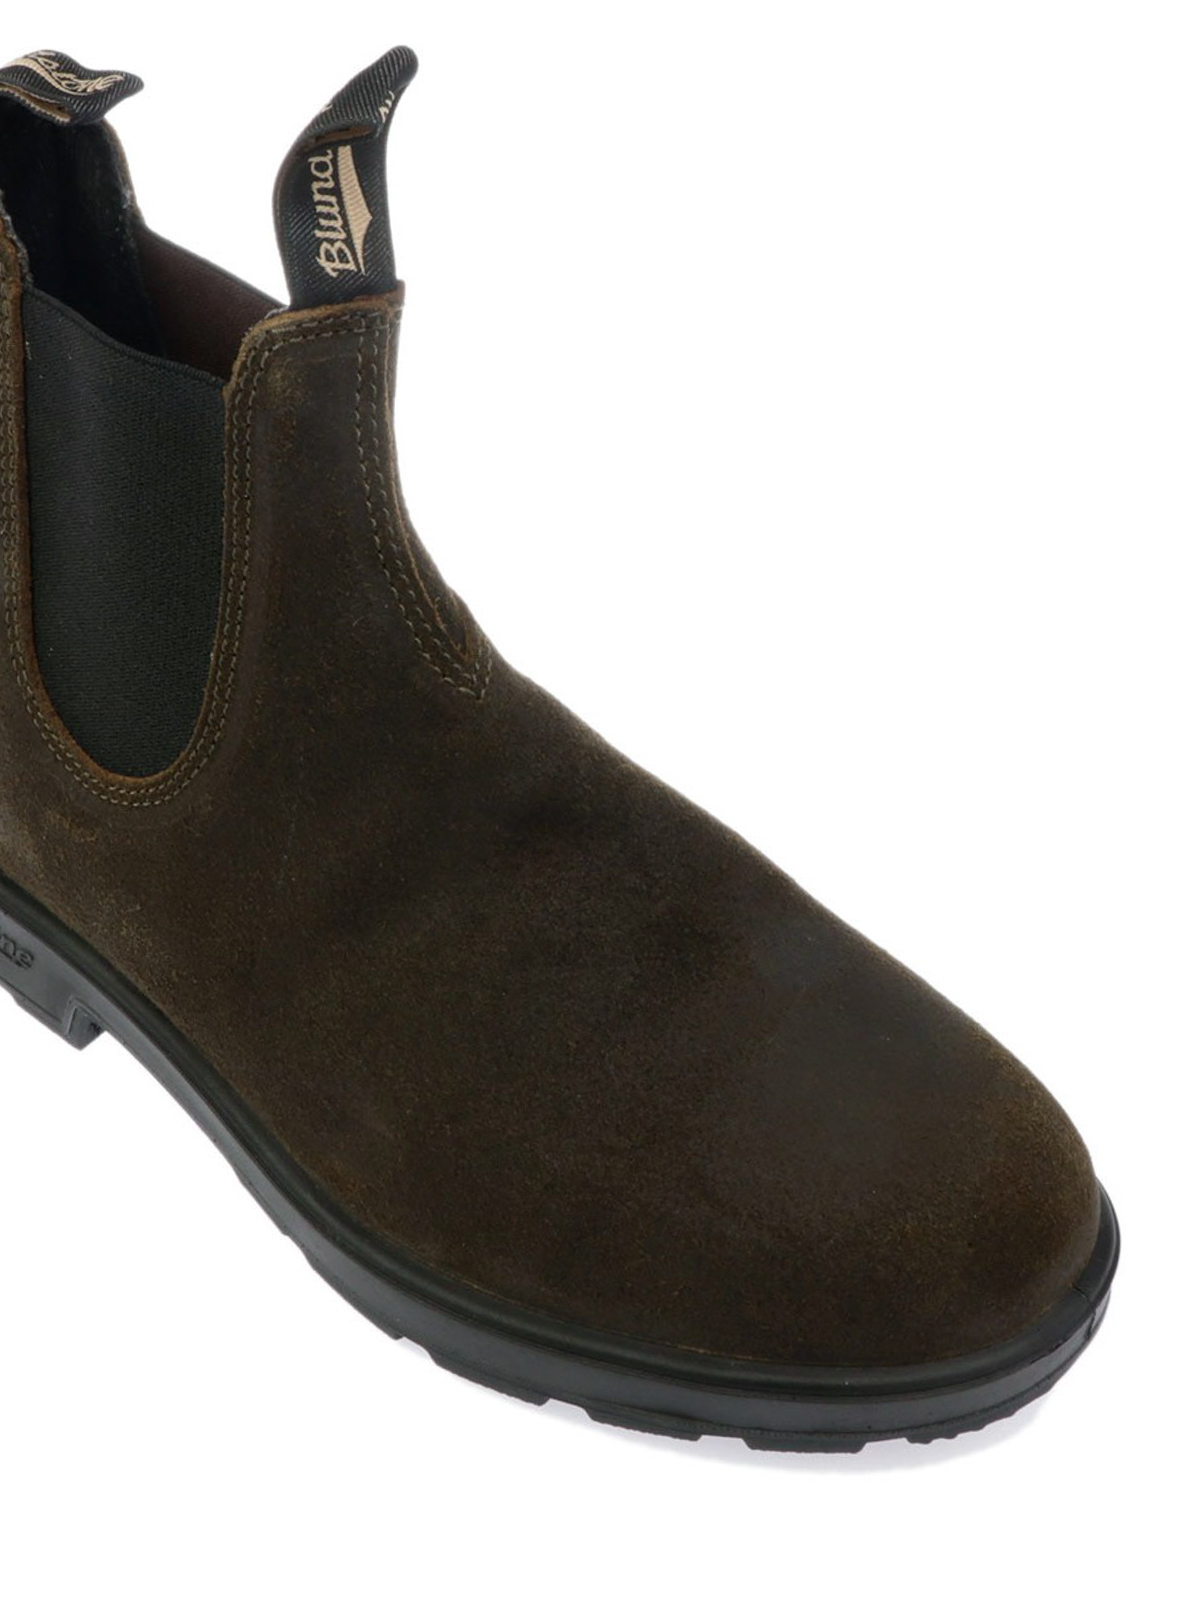 blundstone suede chelsea boots